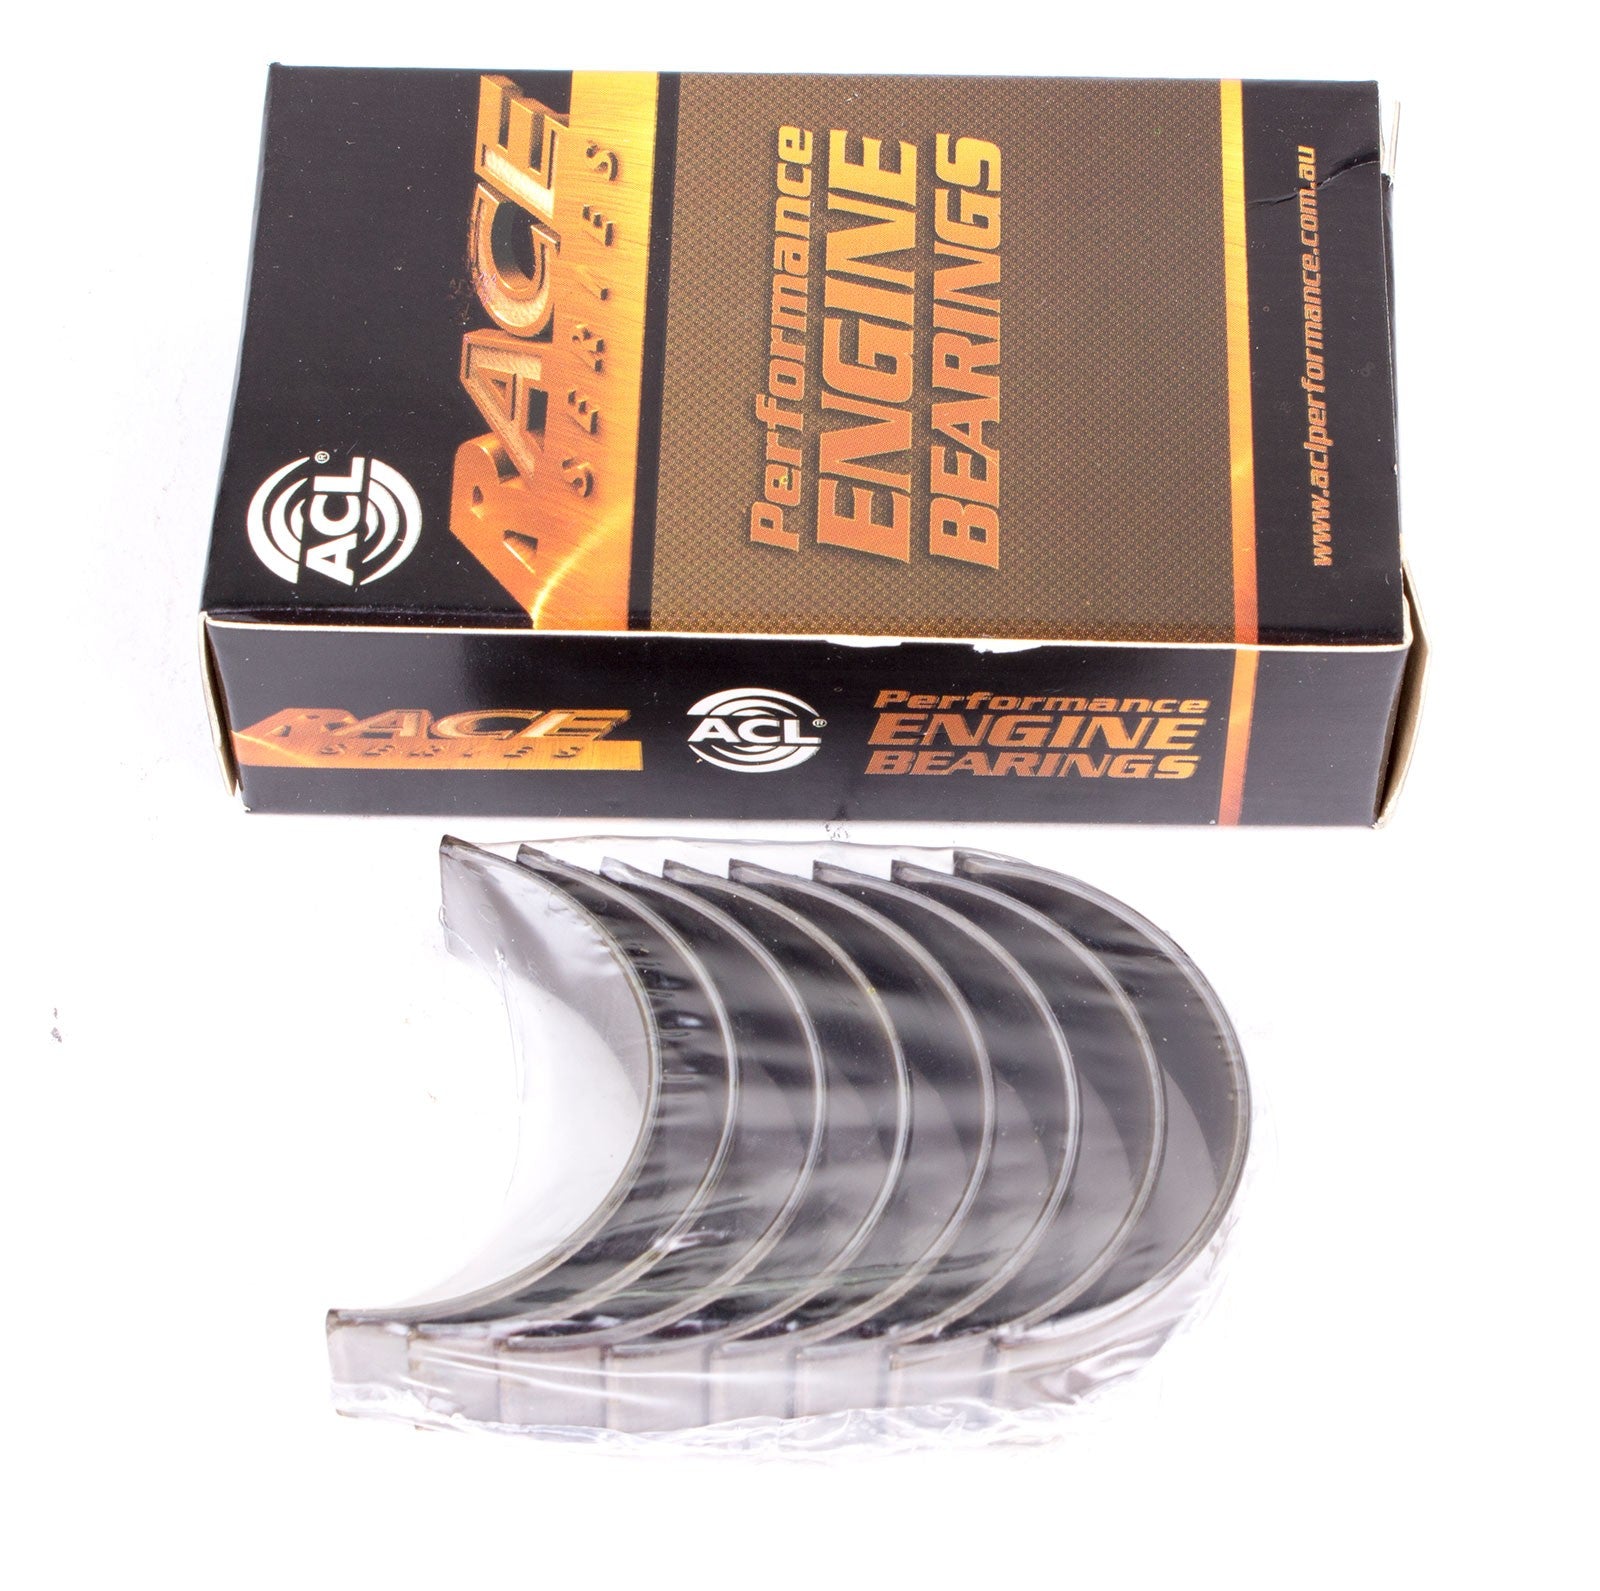 ACL 5M1538H-.50 Main bearing set (ACL Race Series) Photo-0 